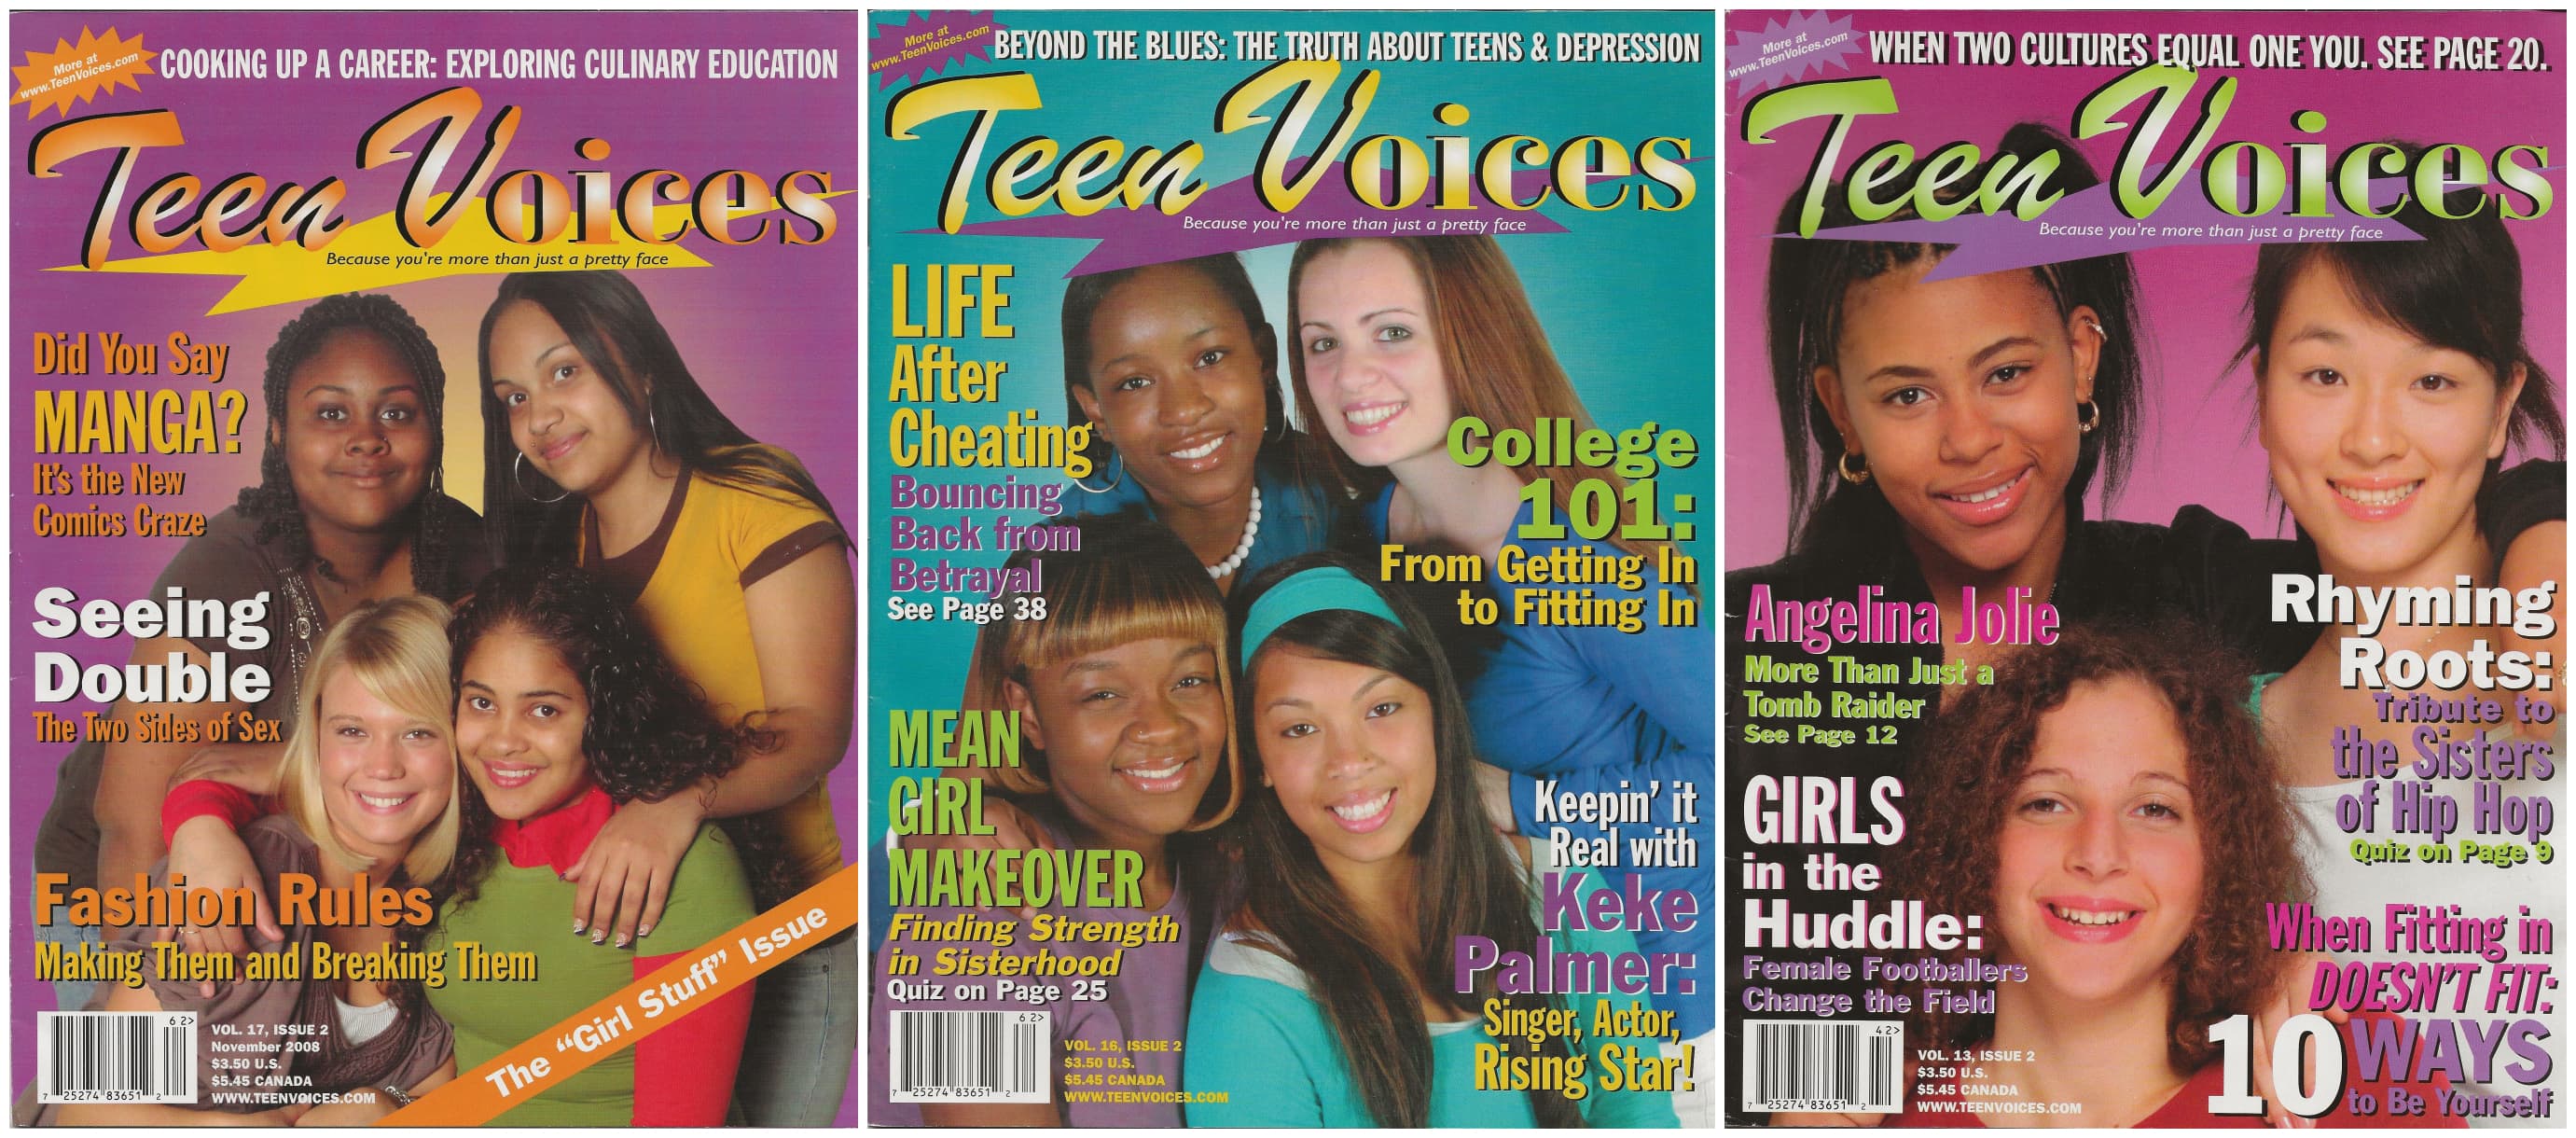 For more than 20 years Teen Voices was a magazine written by and for teen girls to challenge media images and messages. (Courtesy Teen Voices Legacy Project)